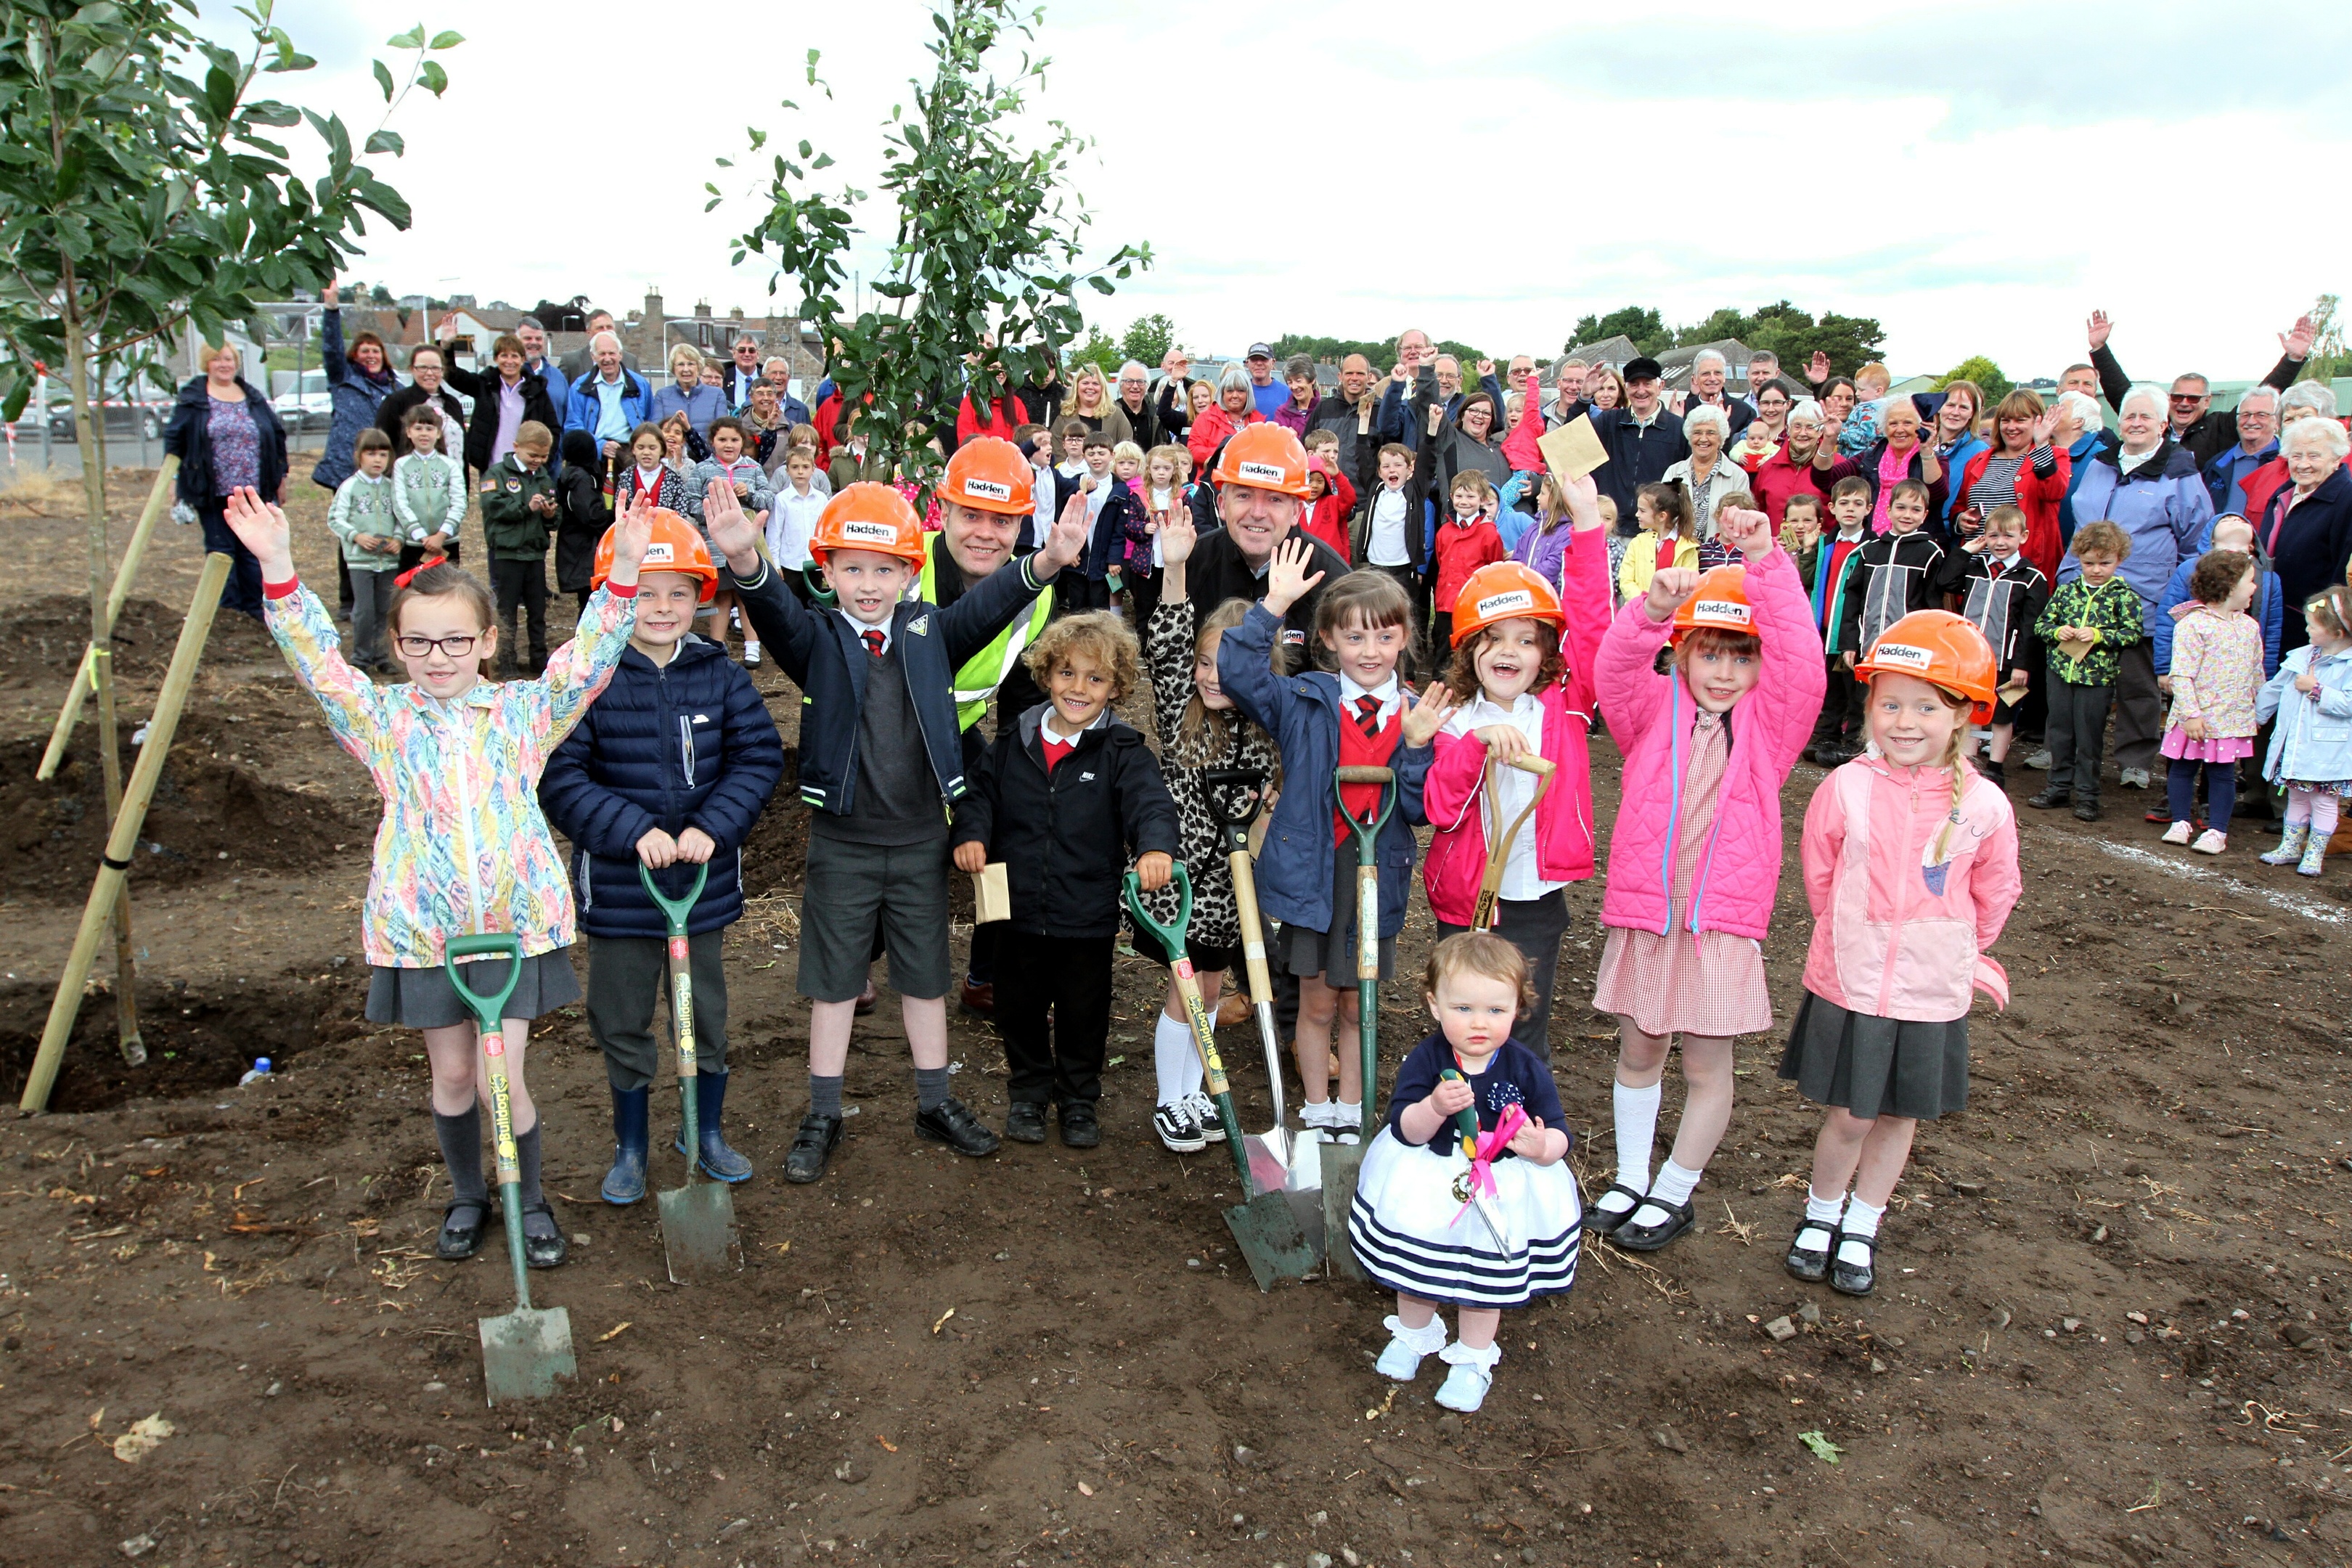 Work begins on Tayport's new Community Hub. Pictured: Derrick Brown & Stephen Lynas from Hadden Construction with Sophie Rennie, Marcus Hegarty, Kai Bates, Maxim Al - Horoub, Meghan McDermott, Lucy Moran, Ivy Lennox, Beth McCallum & Evie Farmer from Tayport Primary school, & in front Aria Abigail Anderson.